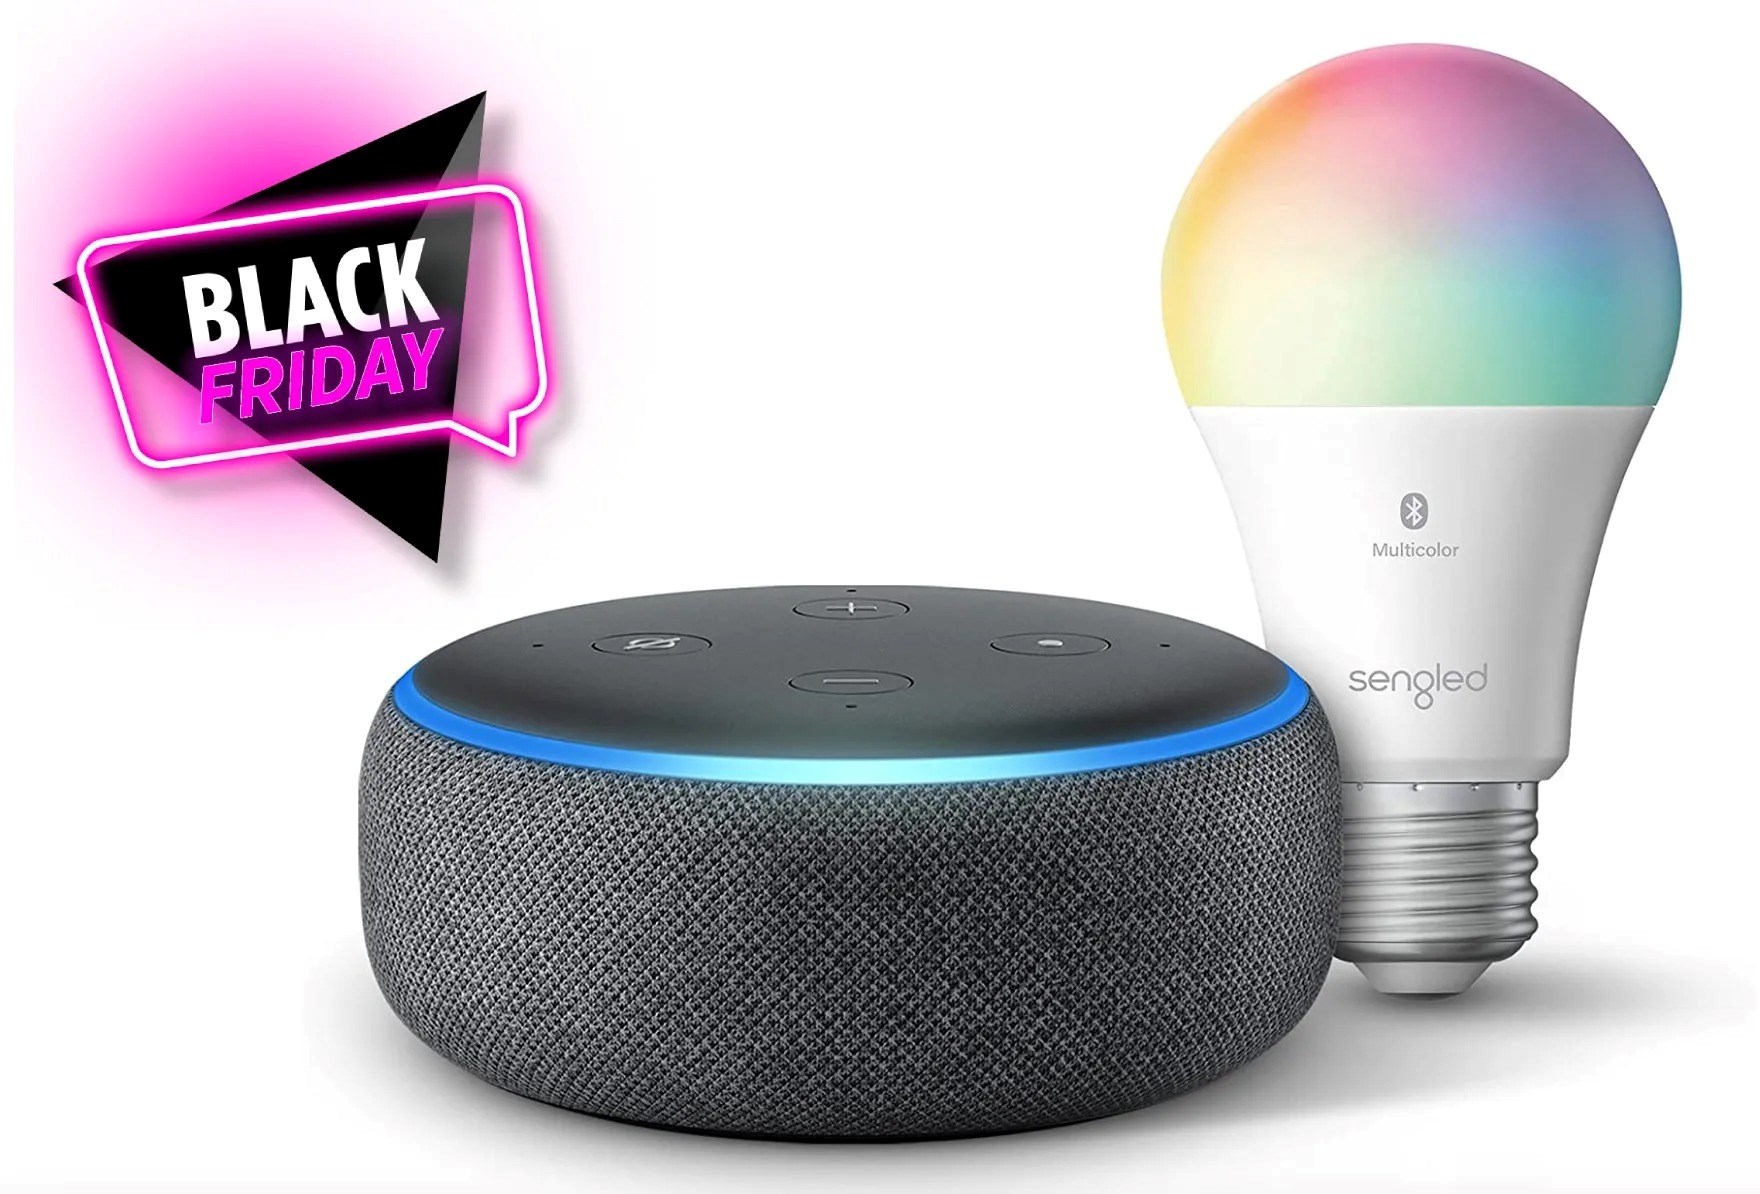 What Was Black Friday Price For Amazon Echo